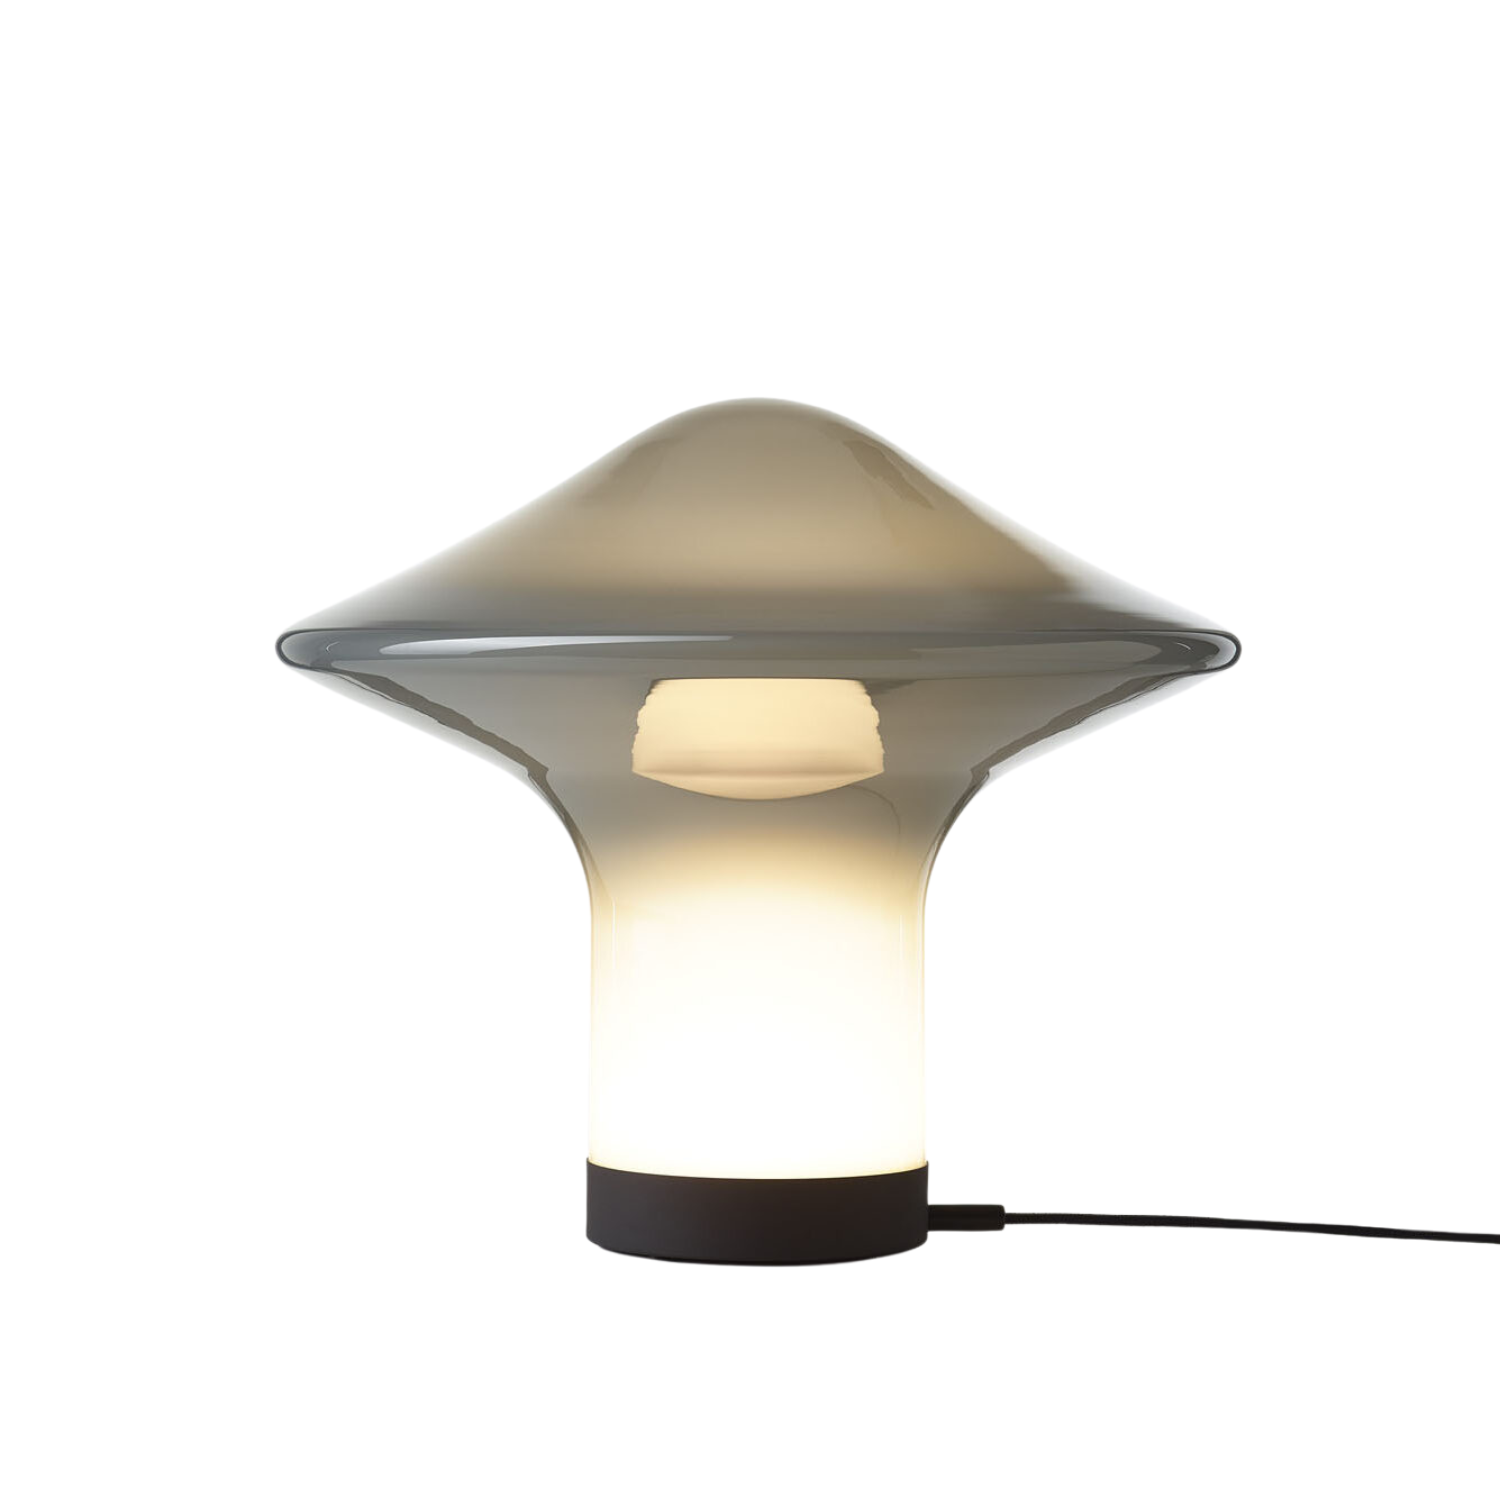 TROTTOLA L - Table Lamp